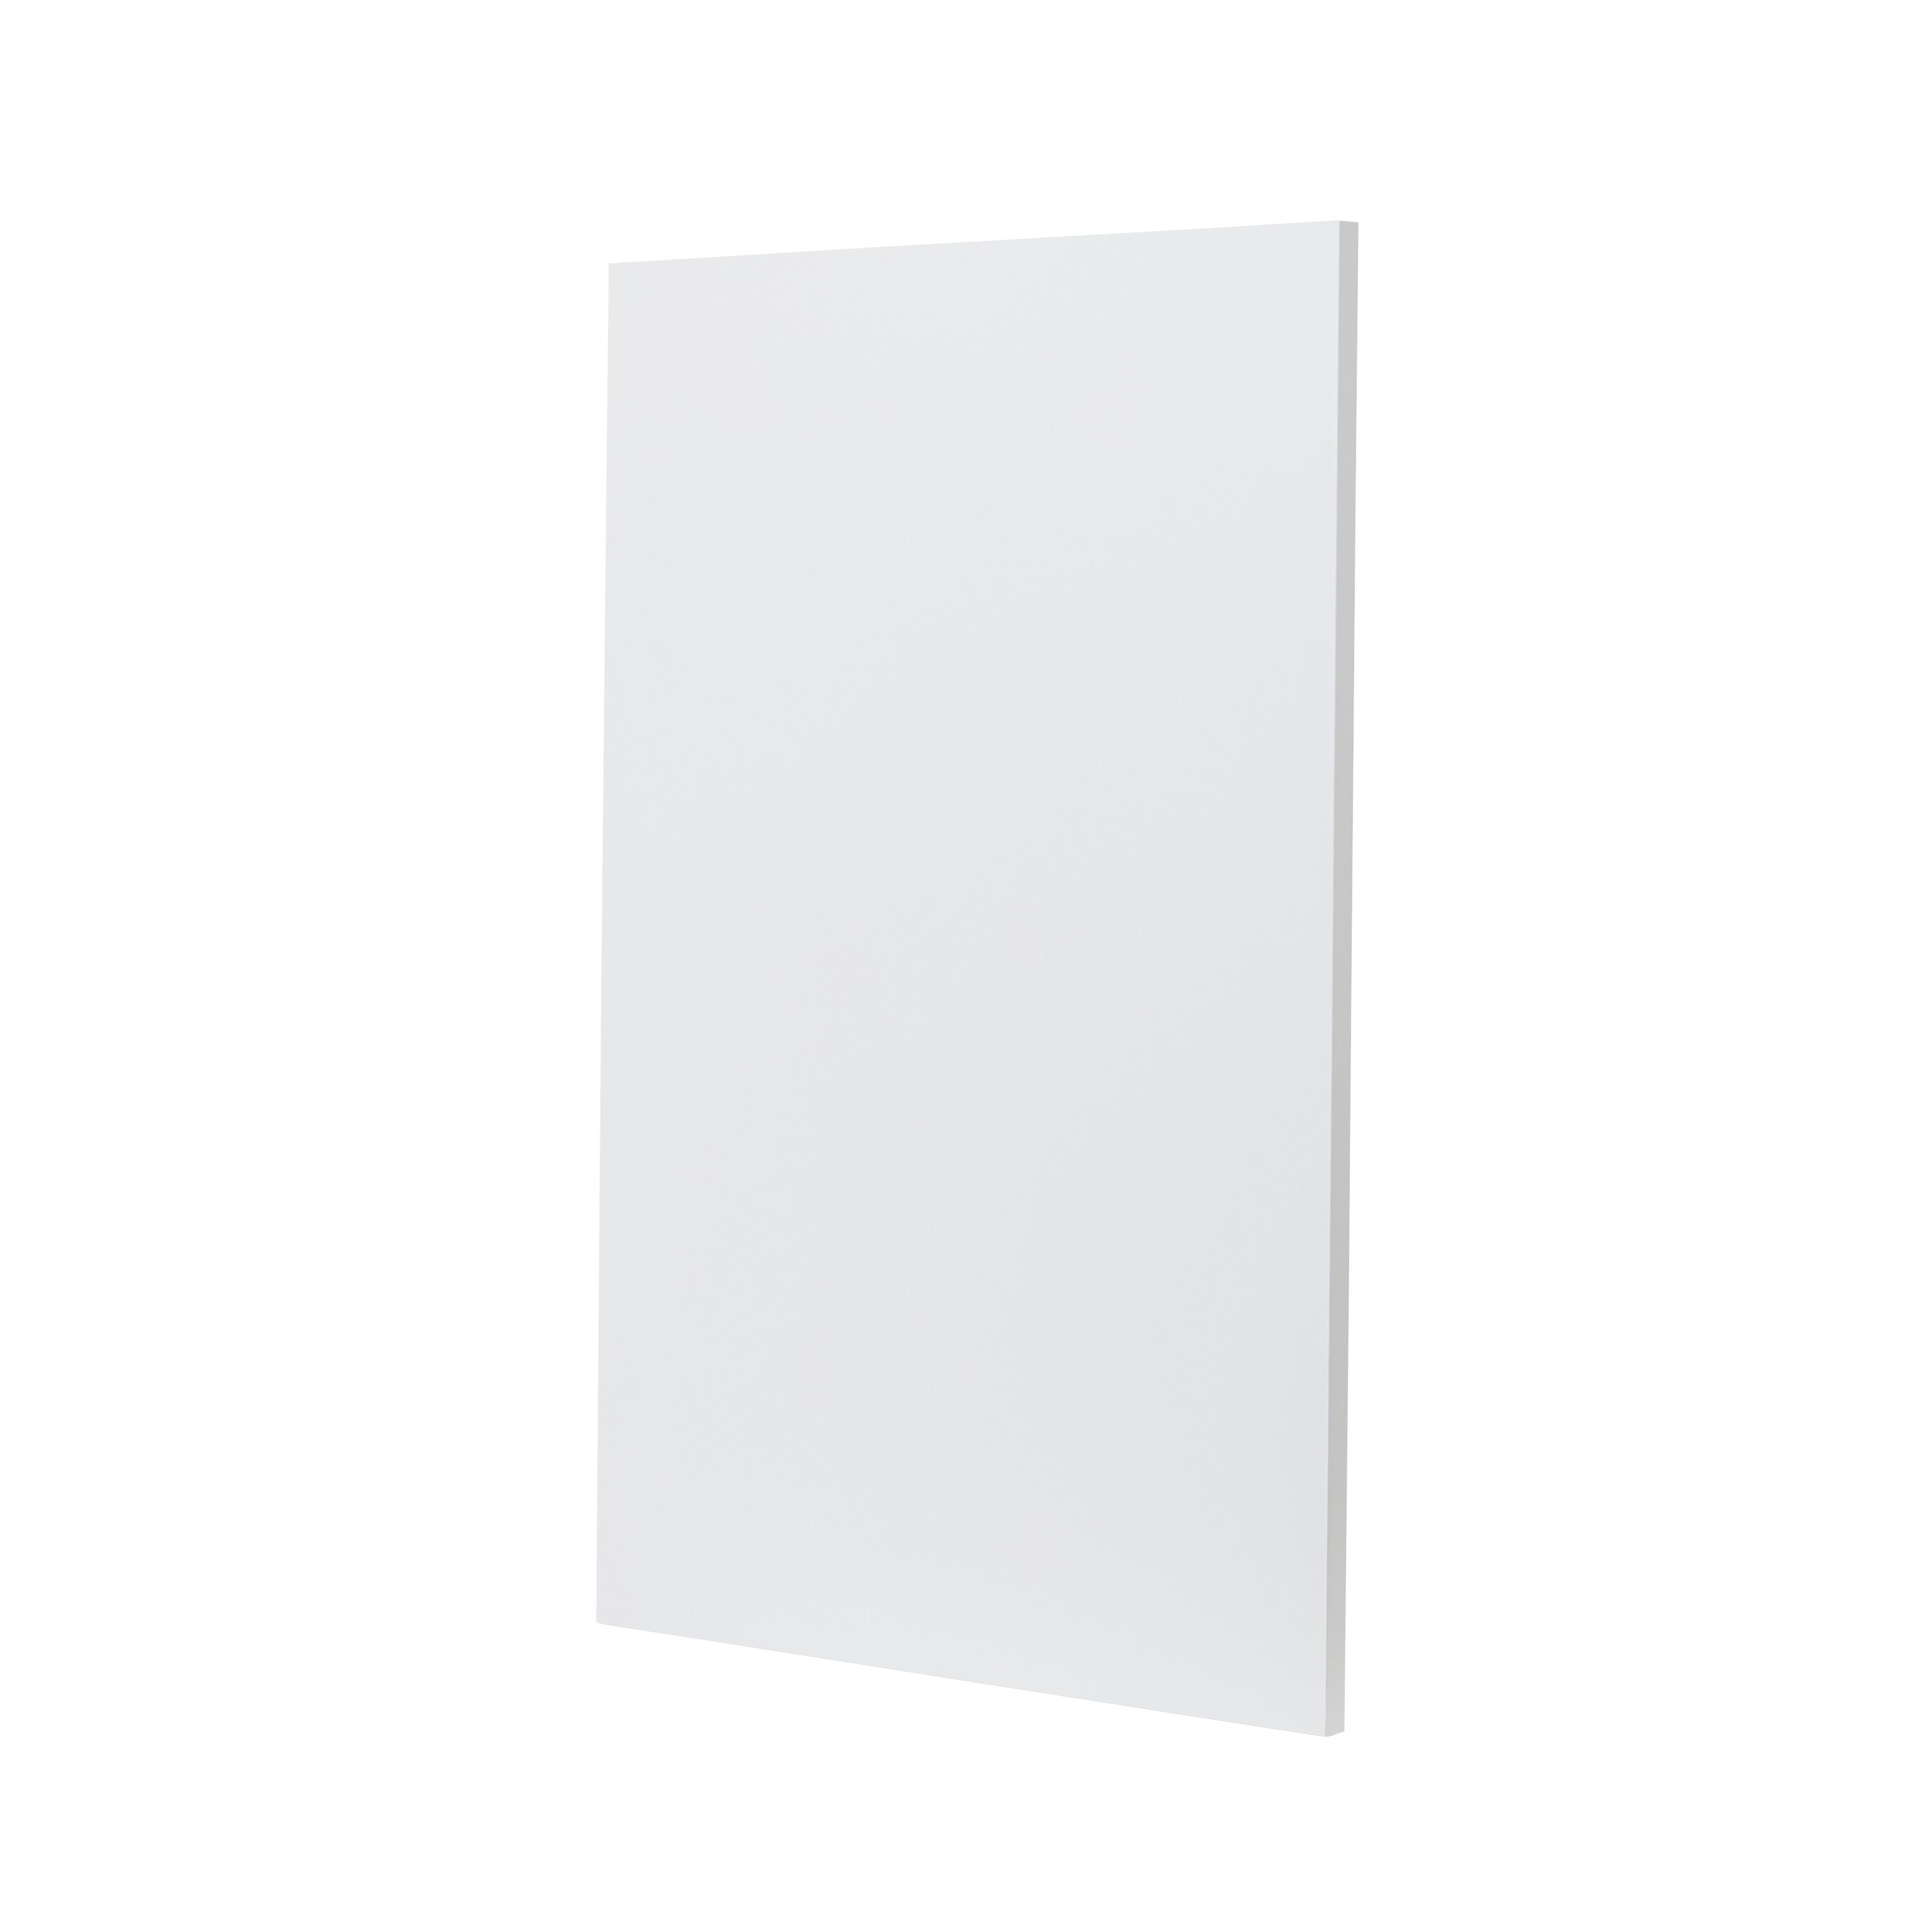 GoodHome Alpinia Matt white tongue & groove shaker Standard Base End support panel (H)870mm (W)590mm